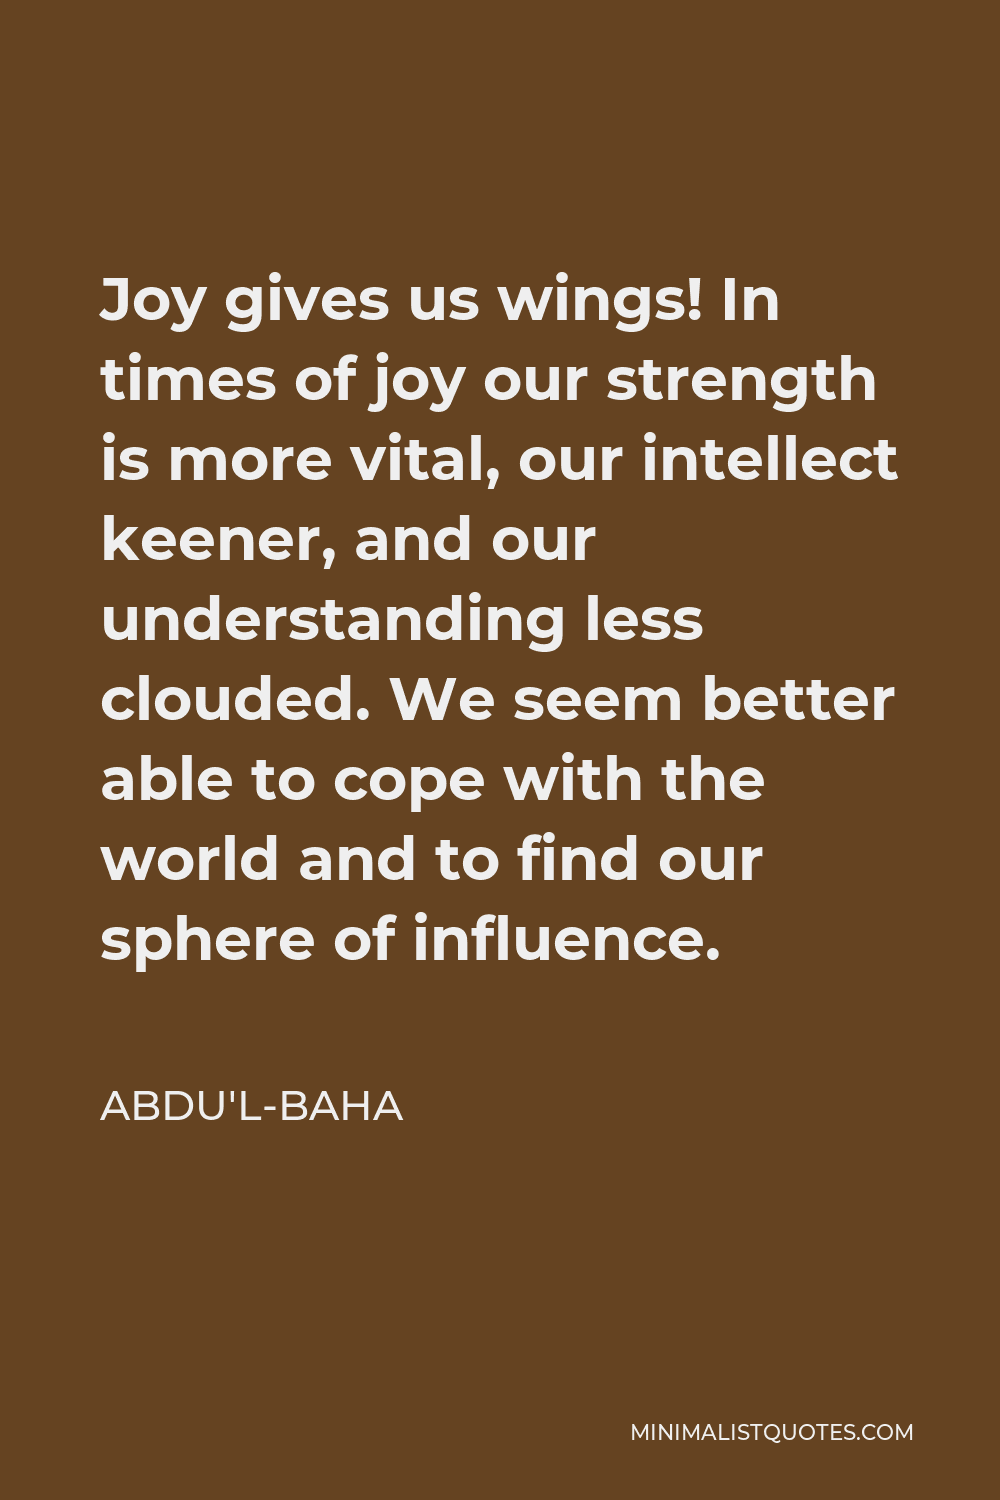 Abdu'l-Baha Quote - Joy gives us wings! In times of joy our strength is more vital, our intellect keener, and our understanding less clouded. We seem better able to cope with the world and to find our sphere of influence.